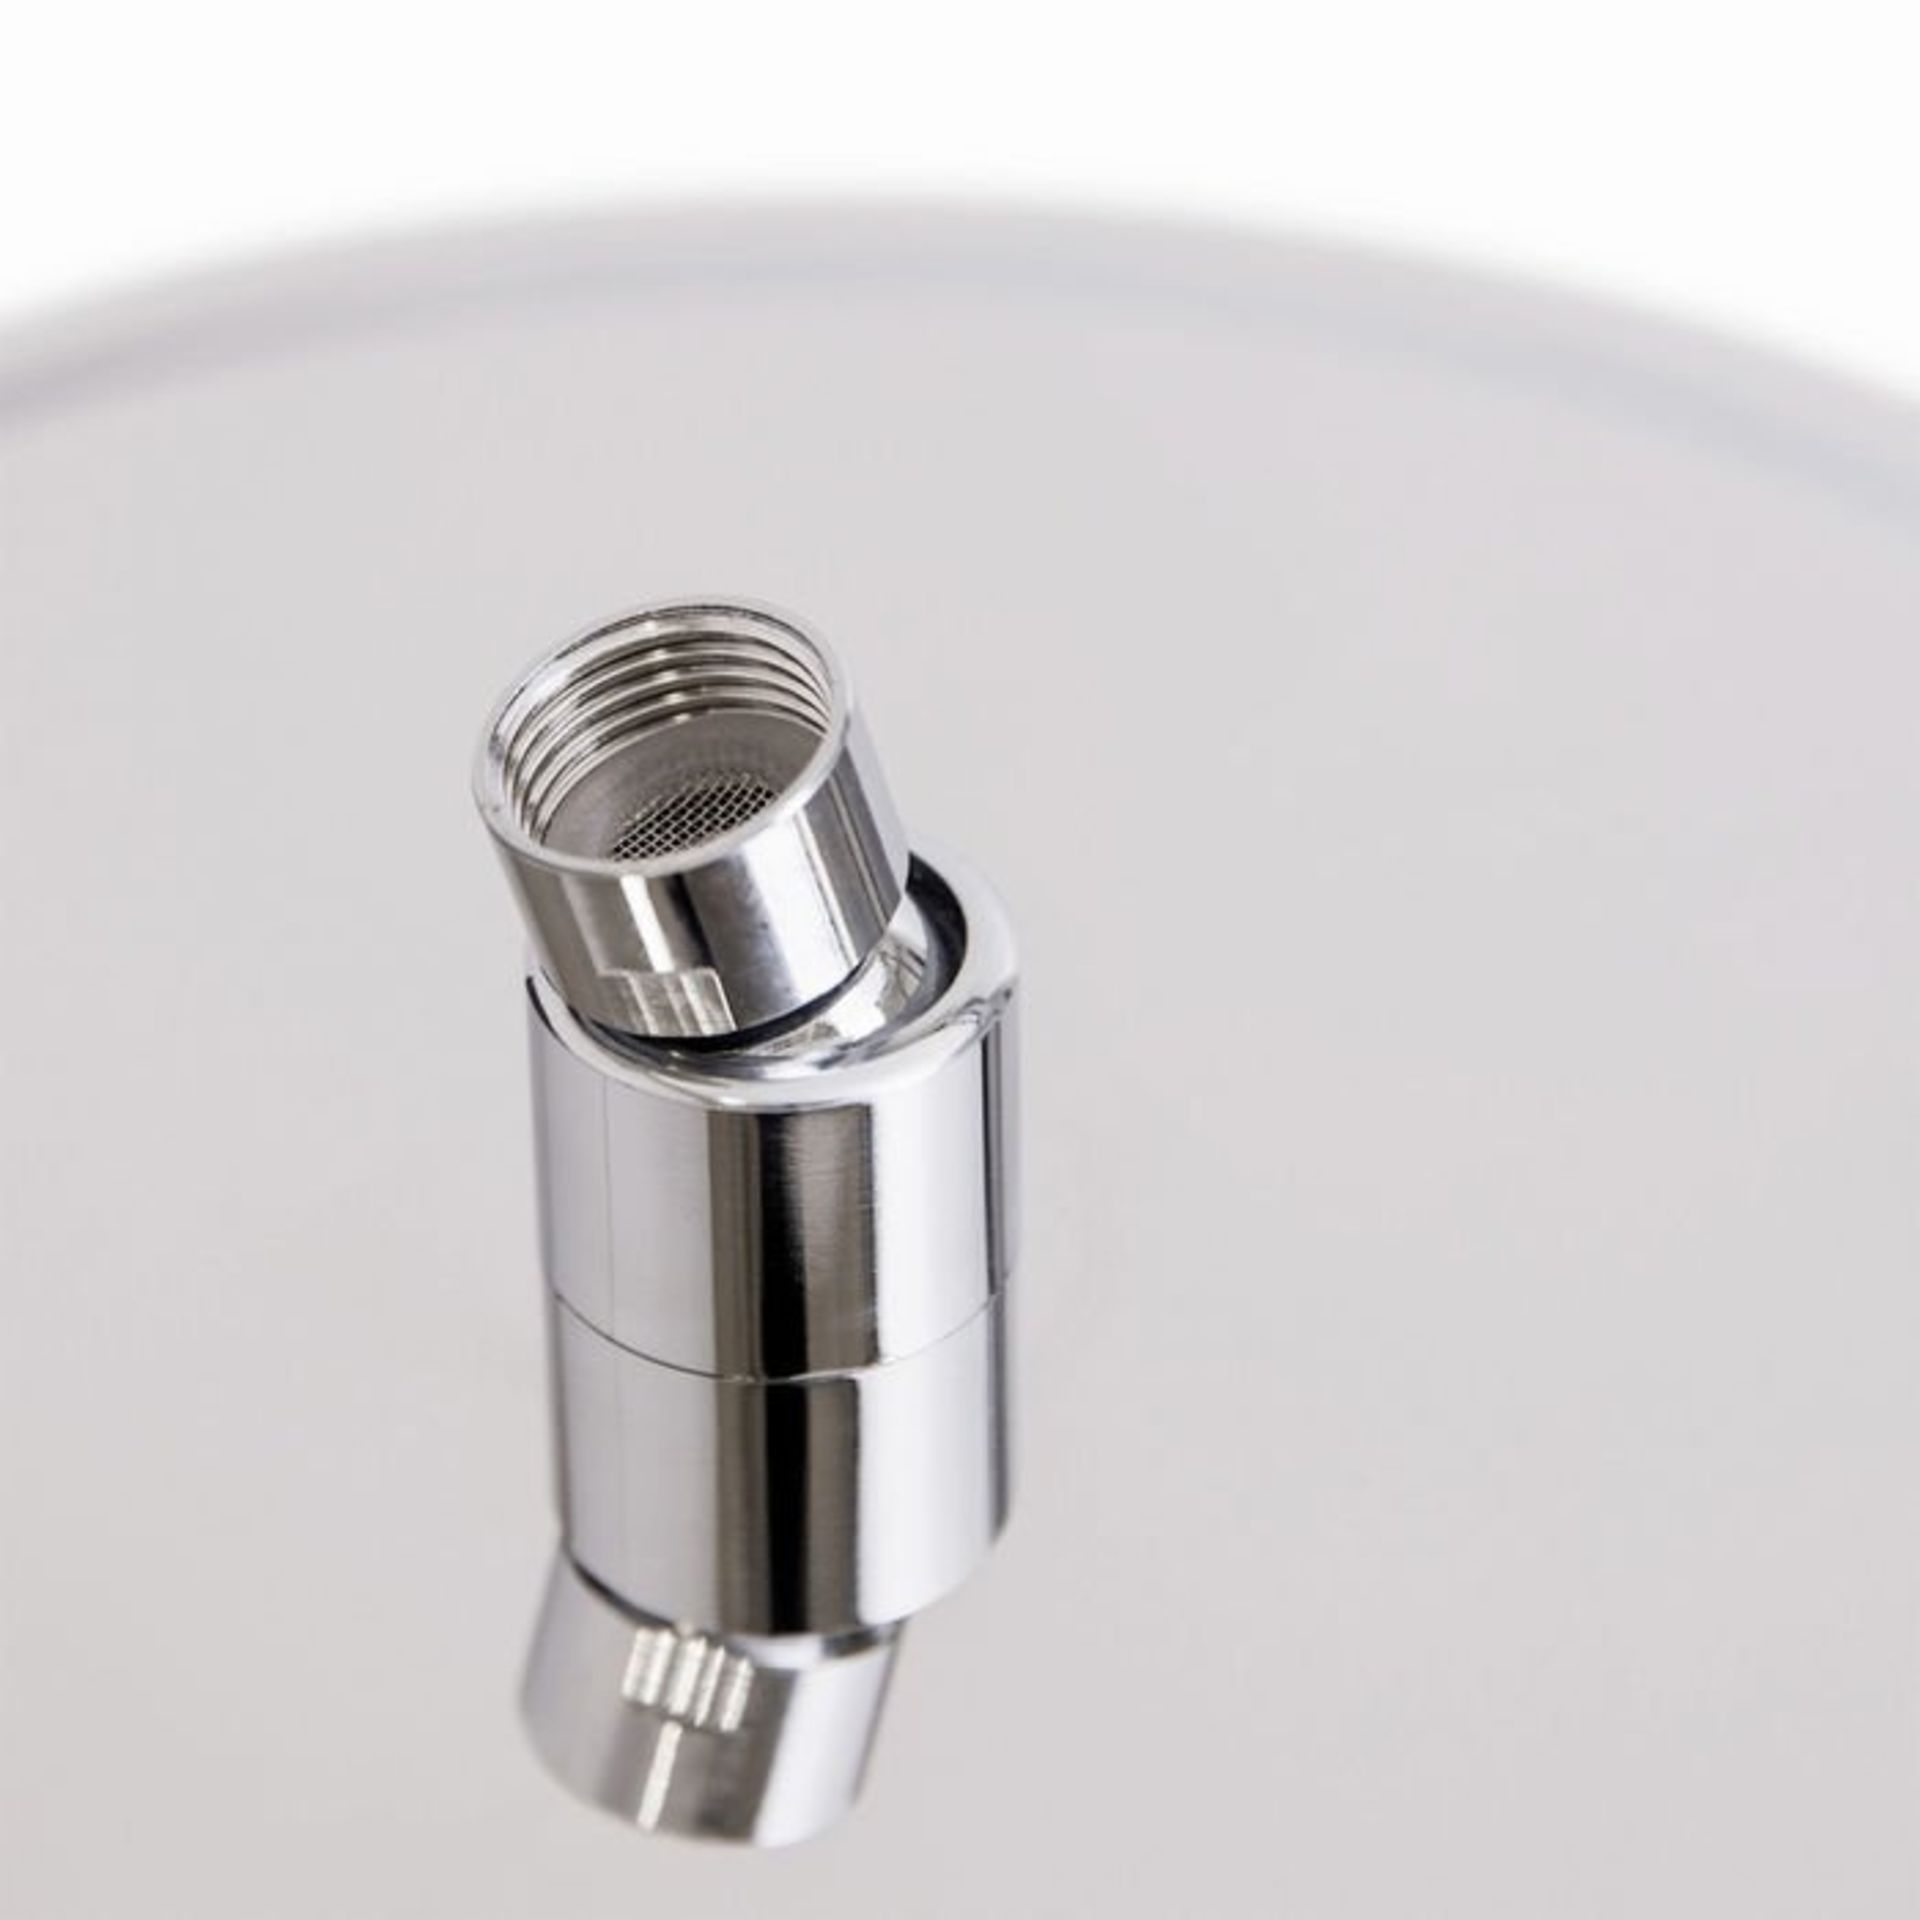 (S41) Round Exposed Thermostatic Mixer Shower Kit & Large Head. Cool to touch shower for - Image 6 of 6